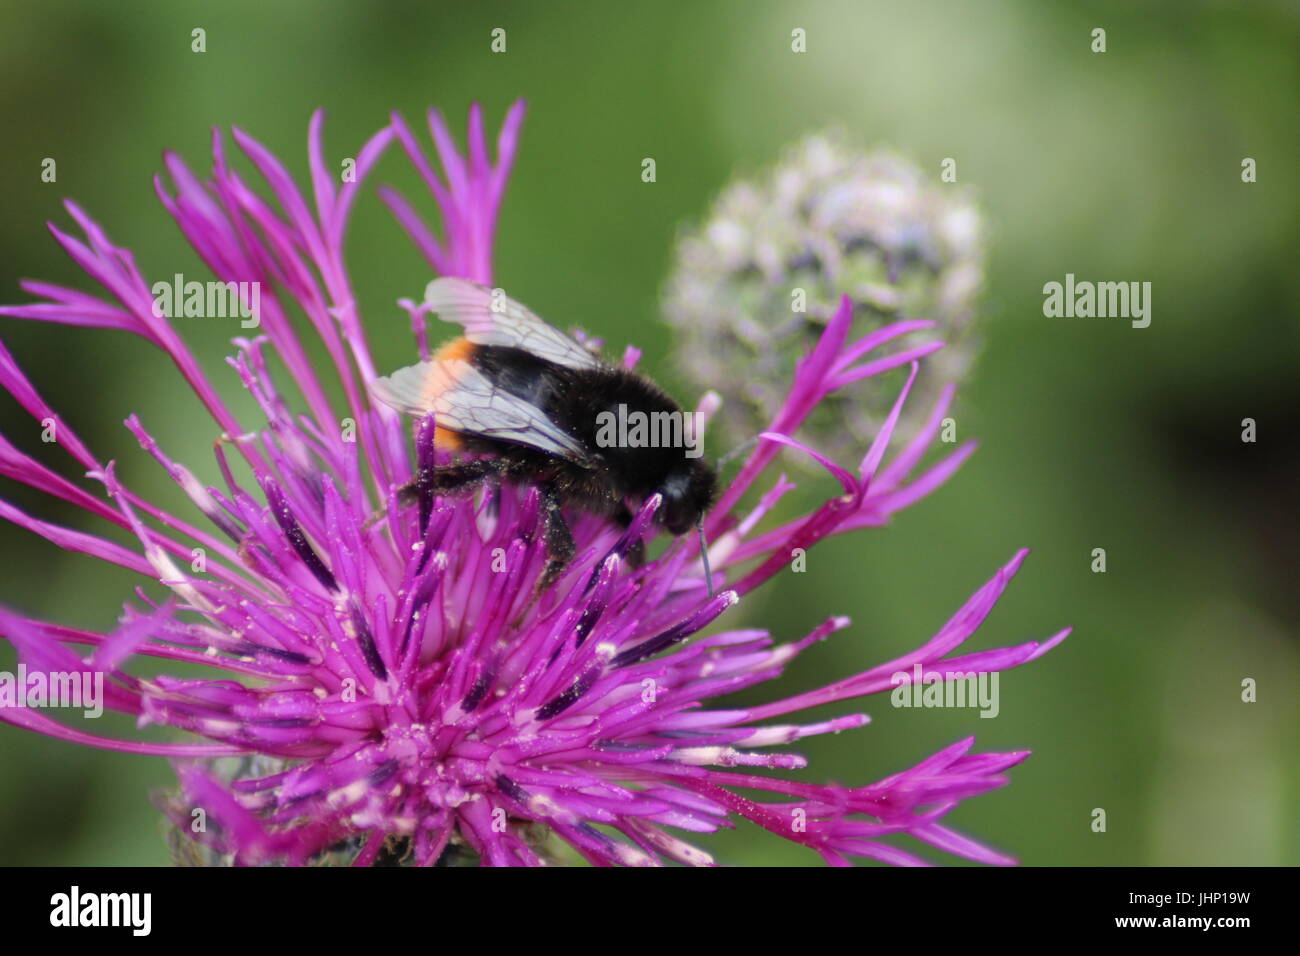 Red tailed bumblebee on flower Stock Photo